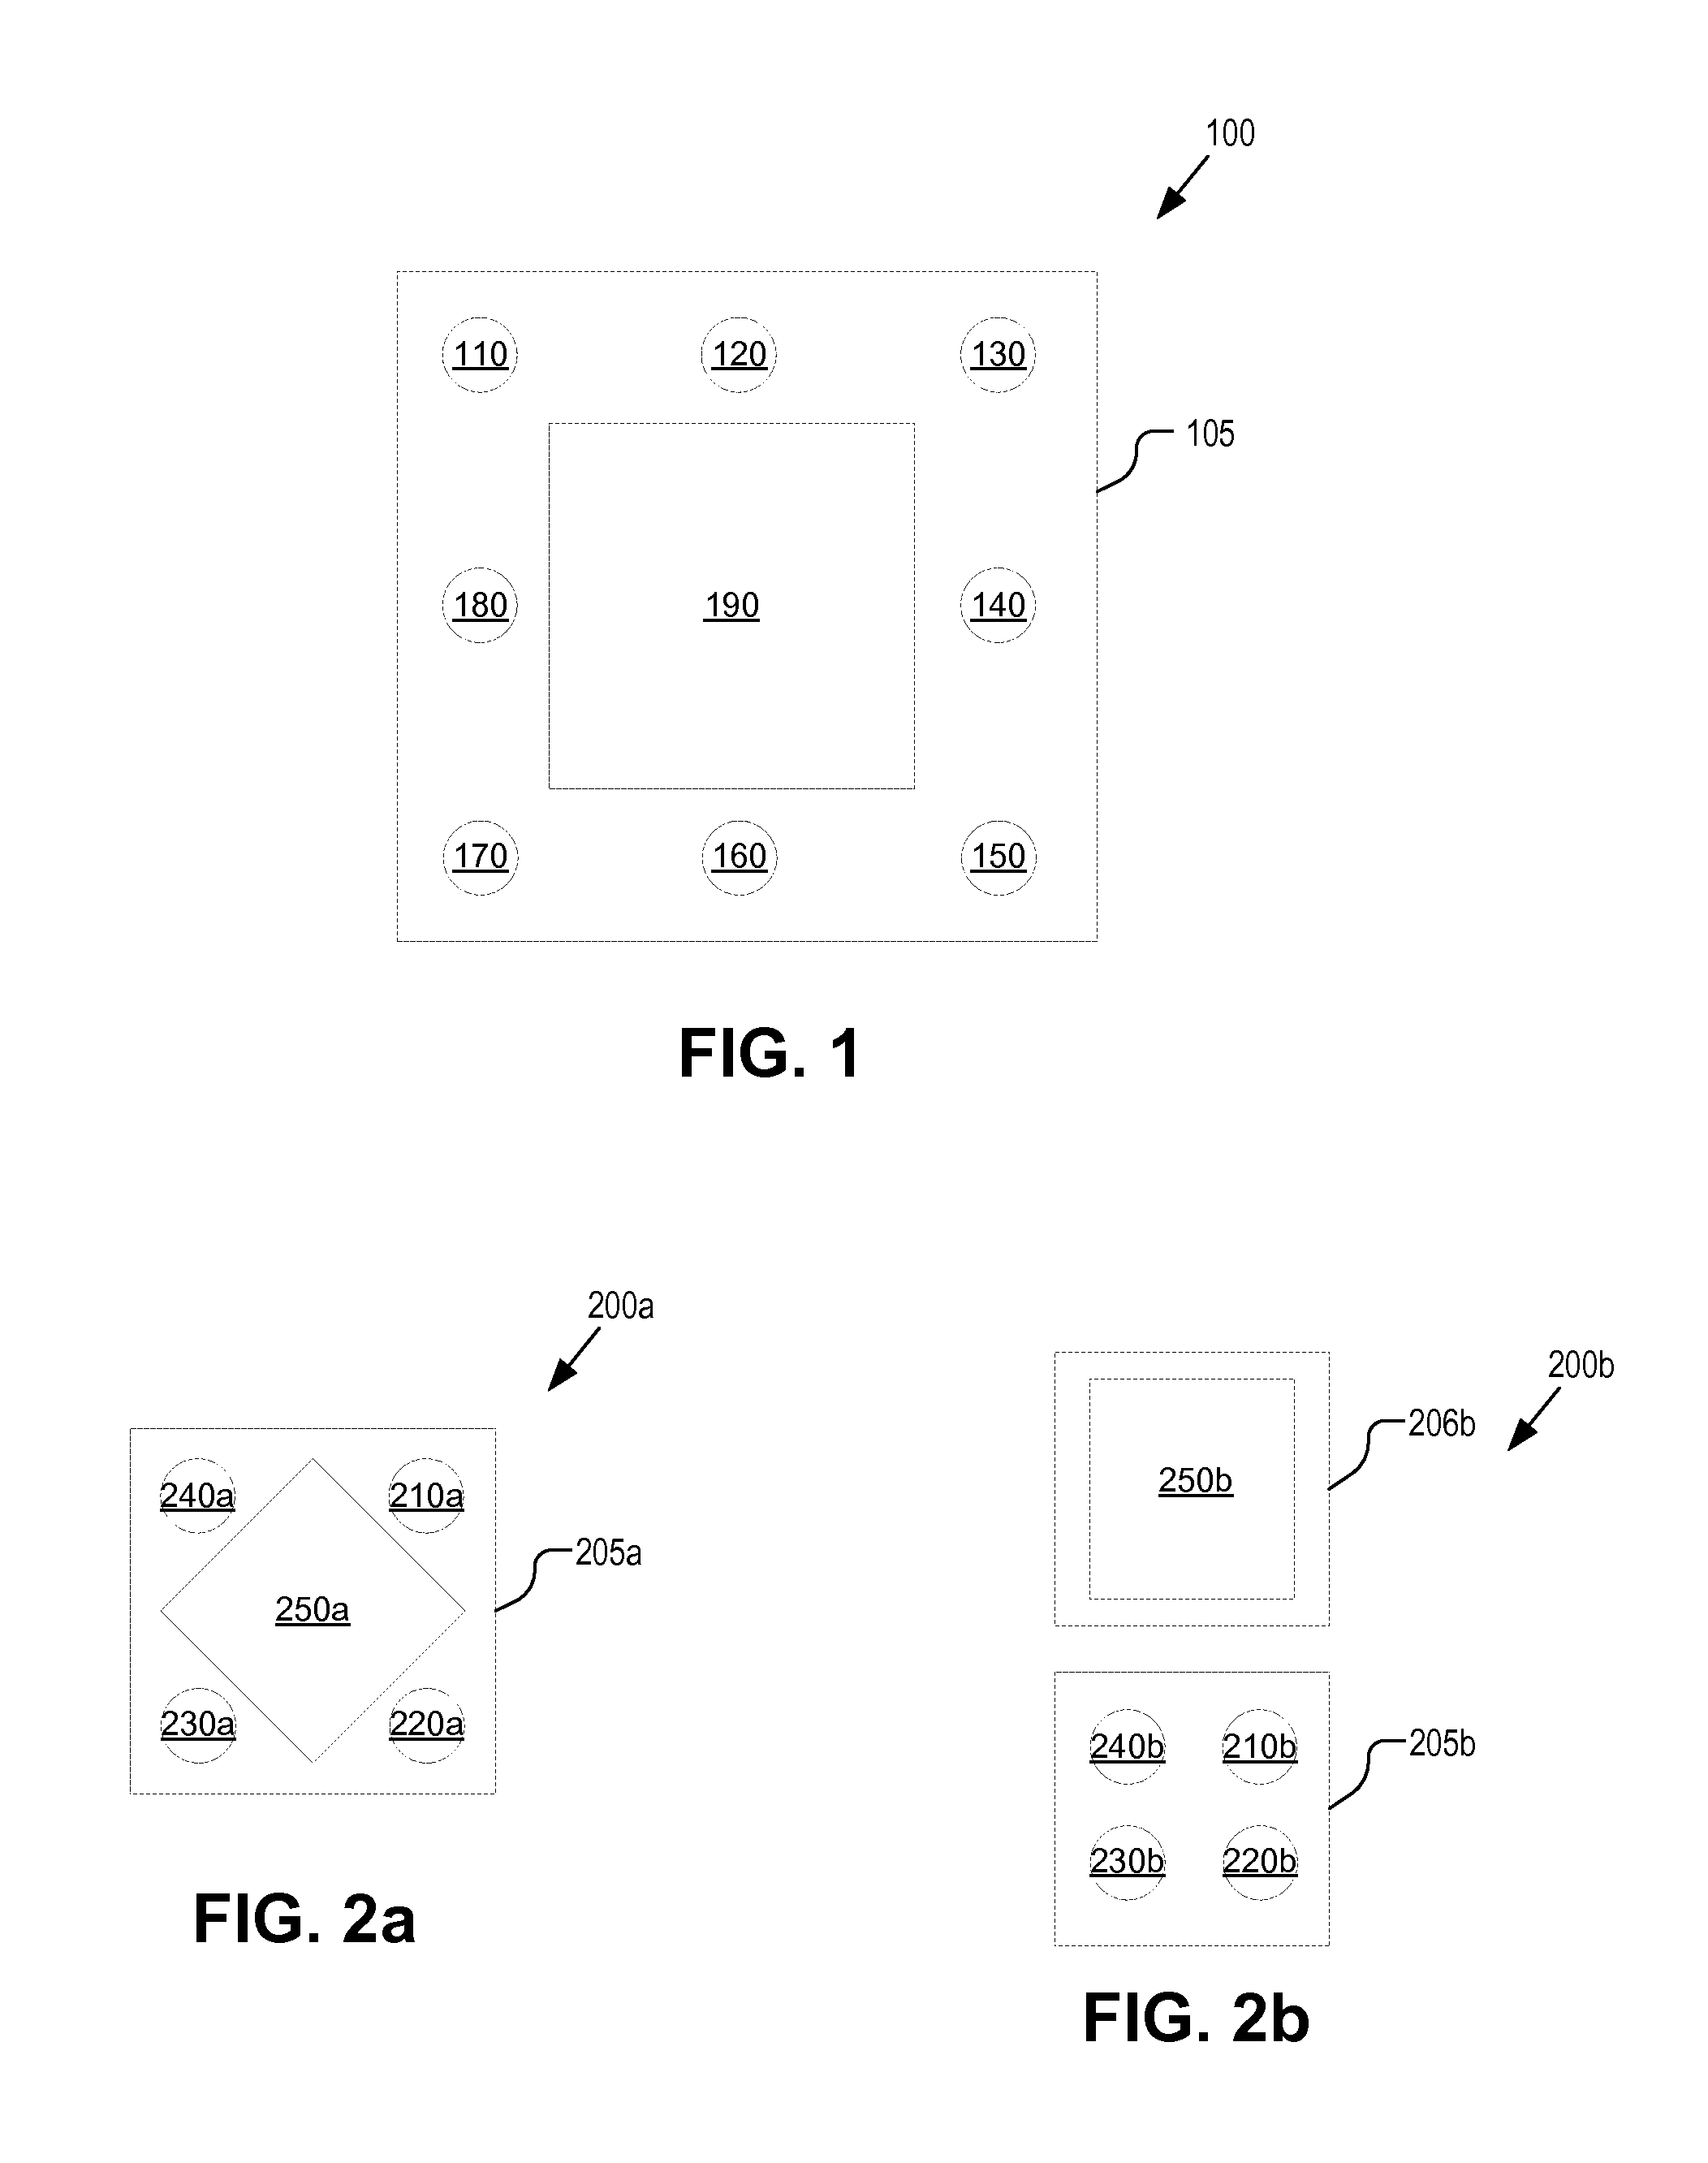 Shared terminal of an image sensor system for transferring image data and control signals